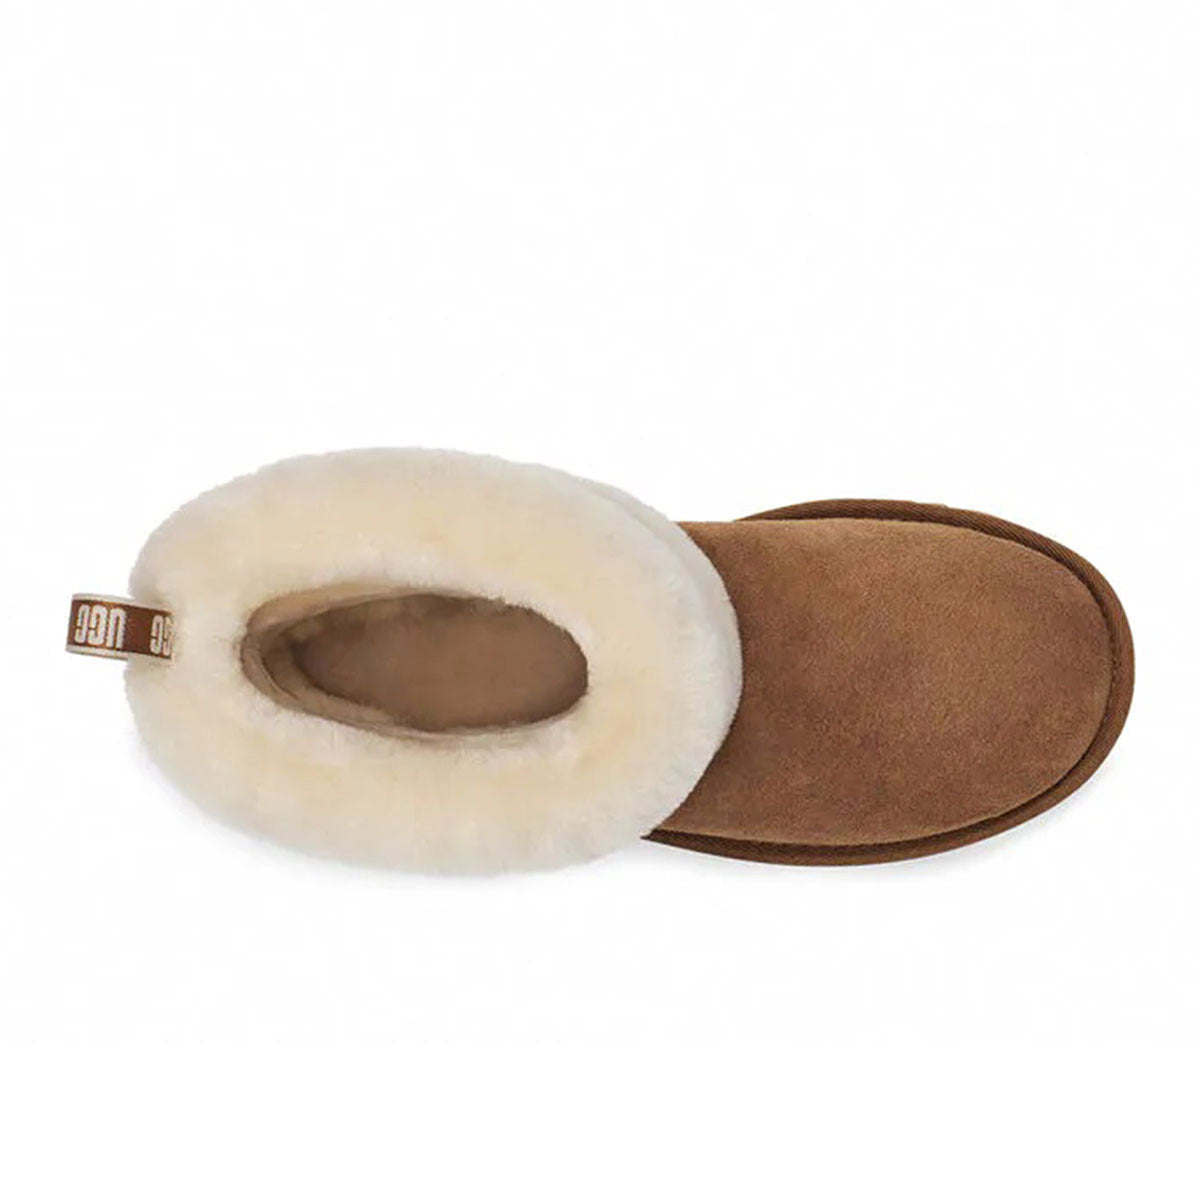 UGG FLUFF MINI QUILTED CHESTNUT - WOMENS